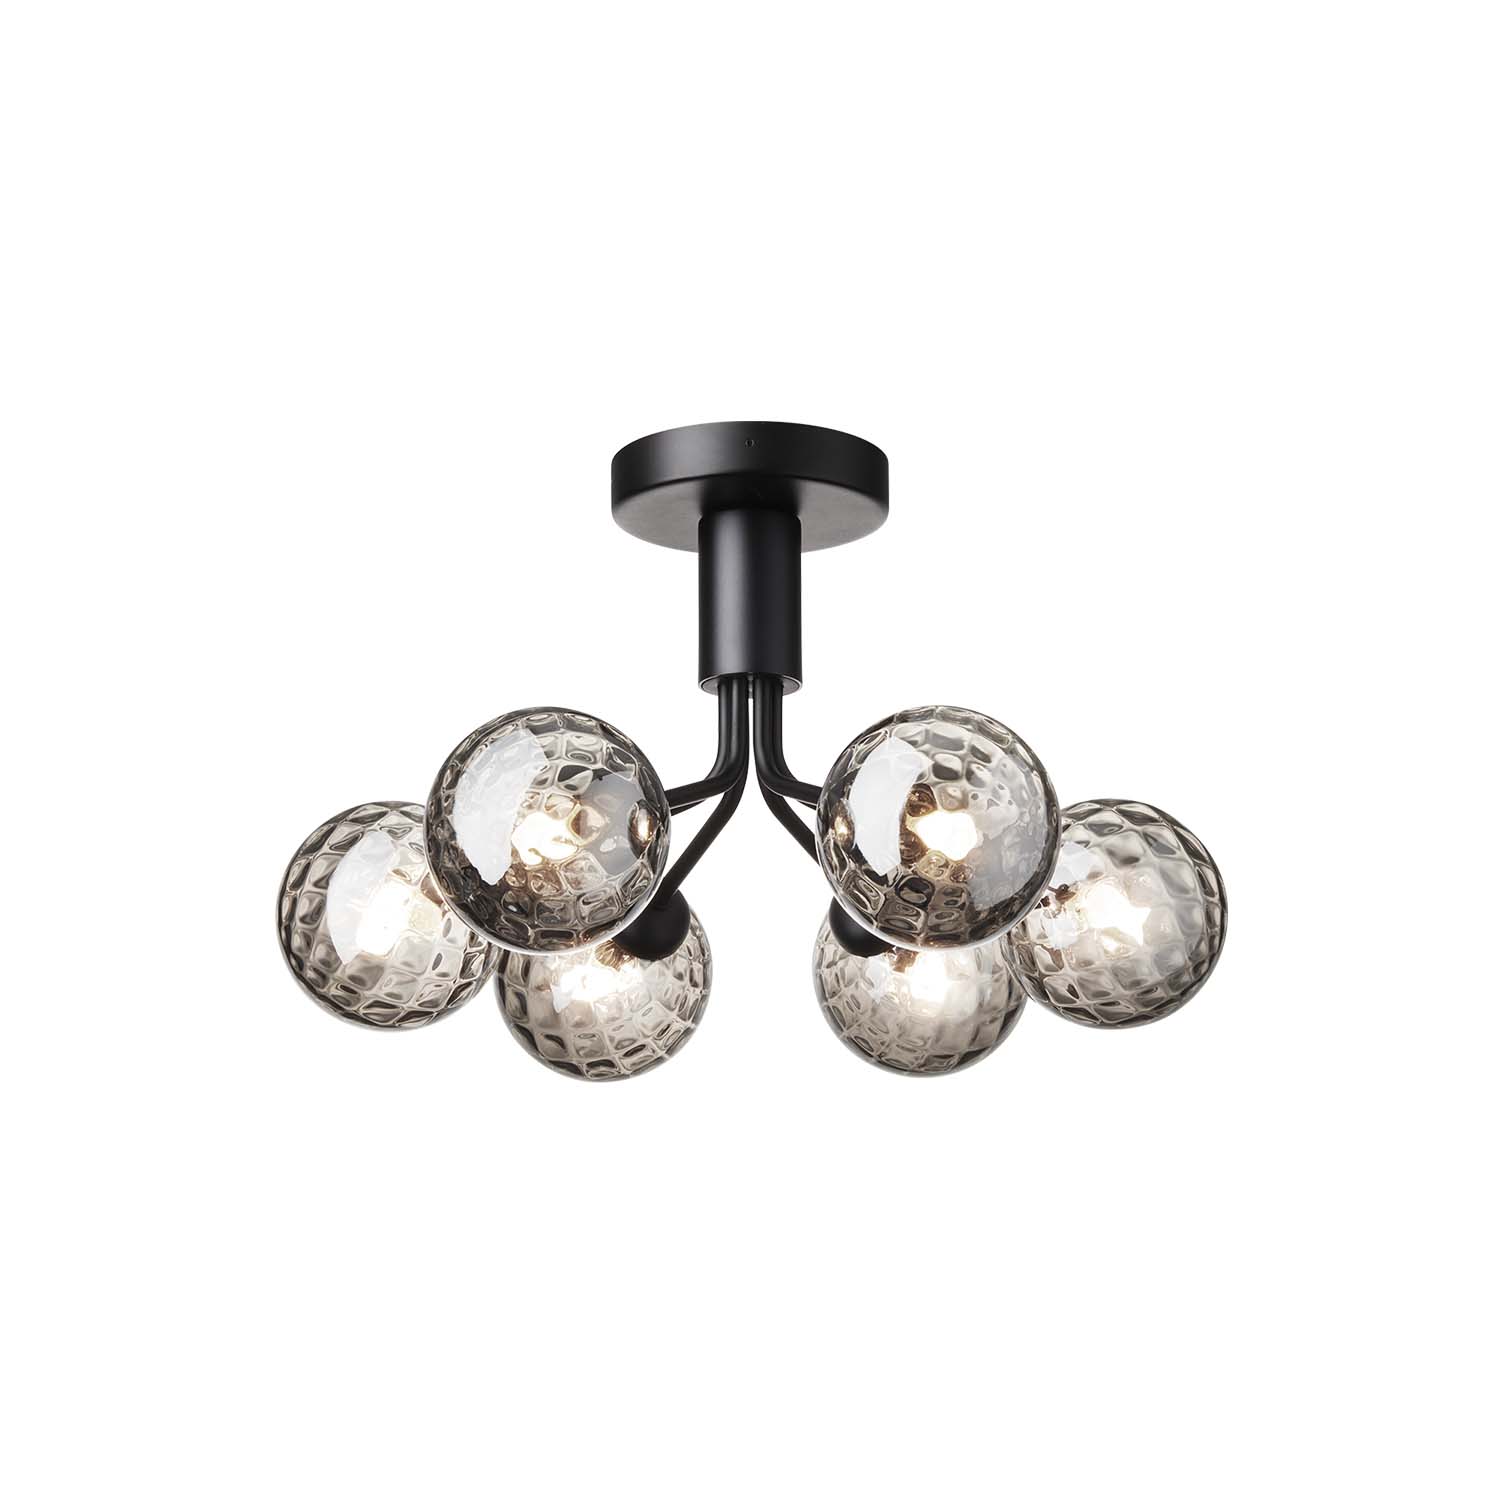 APIALES Optic - Black or gold ceiling light with glass globes